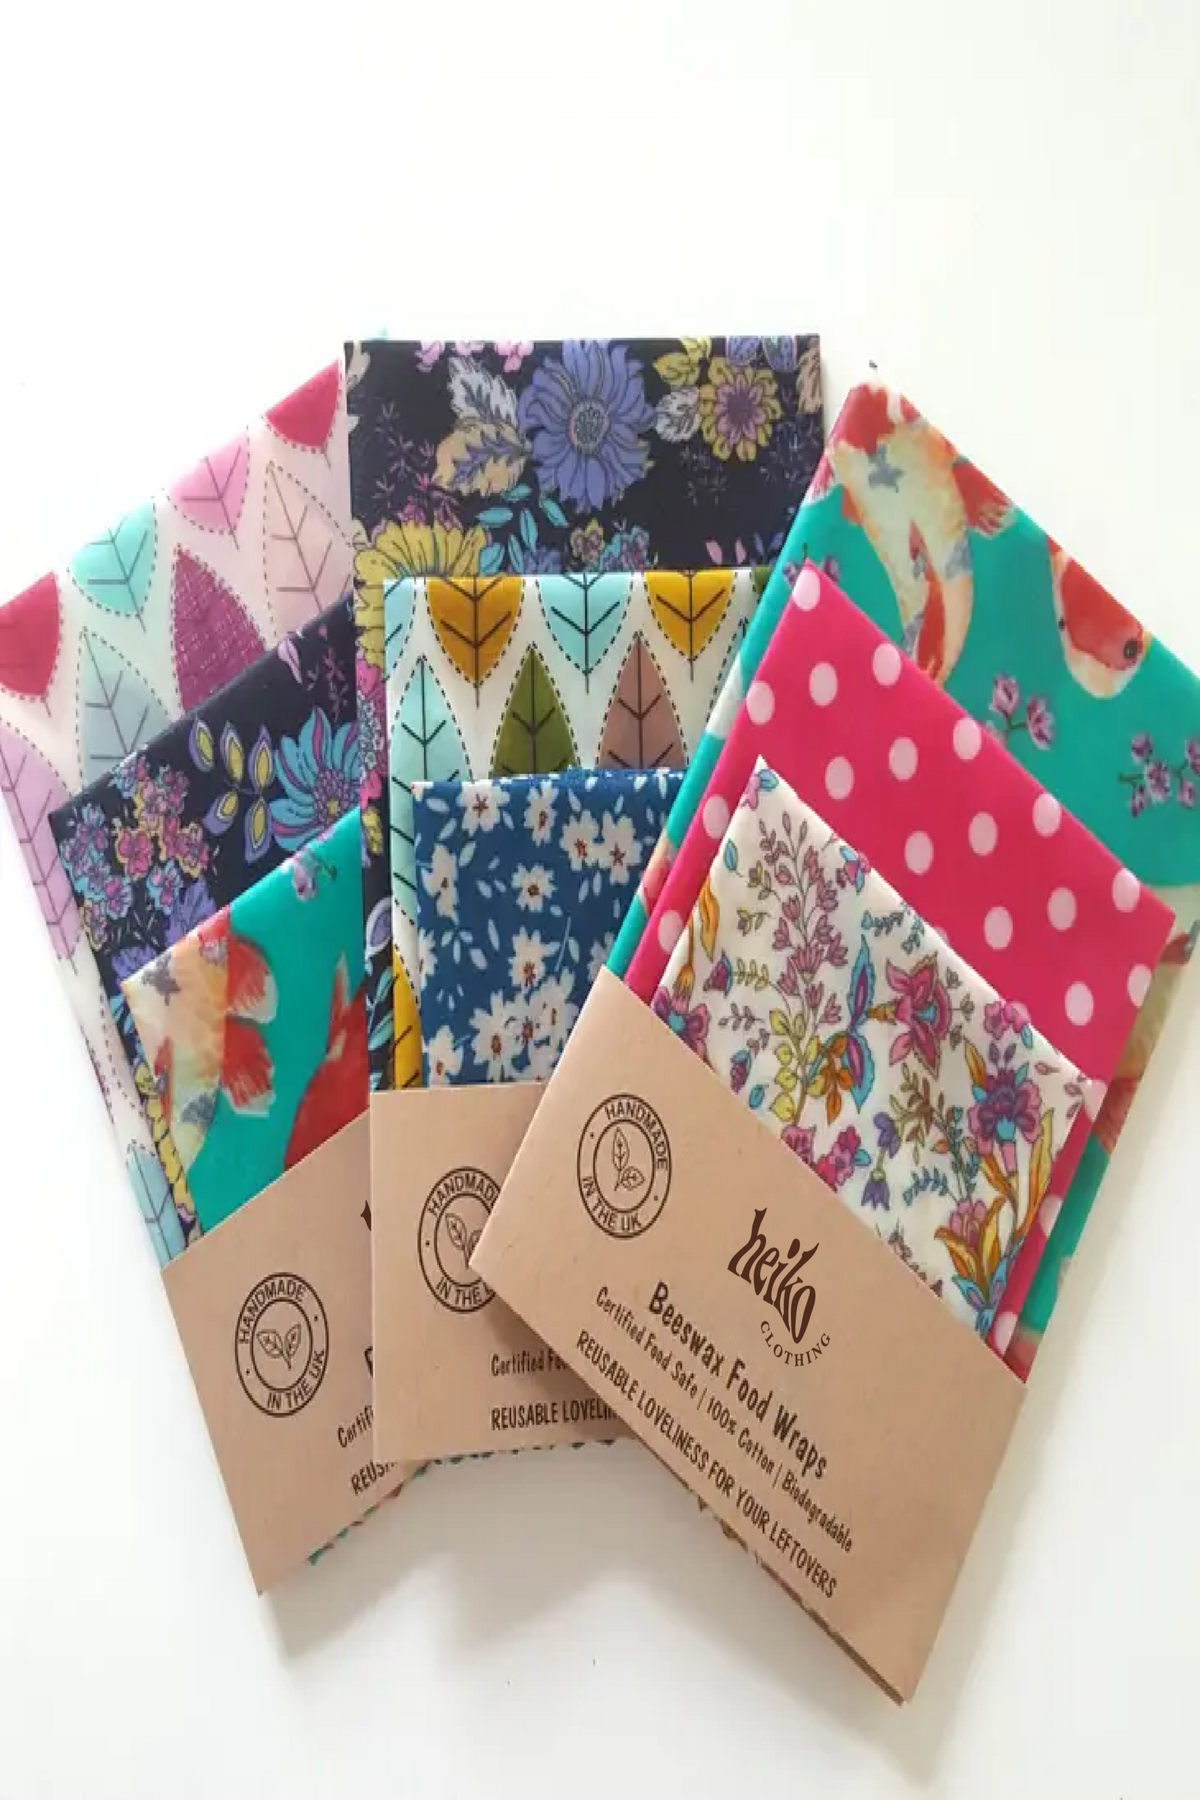 NEW - Beeswax Food Wraps (Pine Resin Free) Certified Food Safe